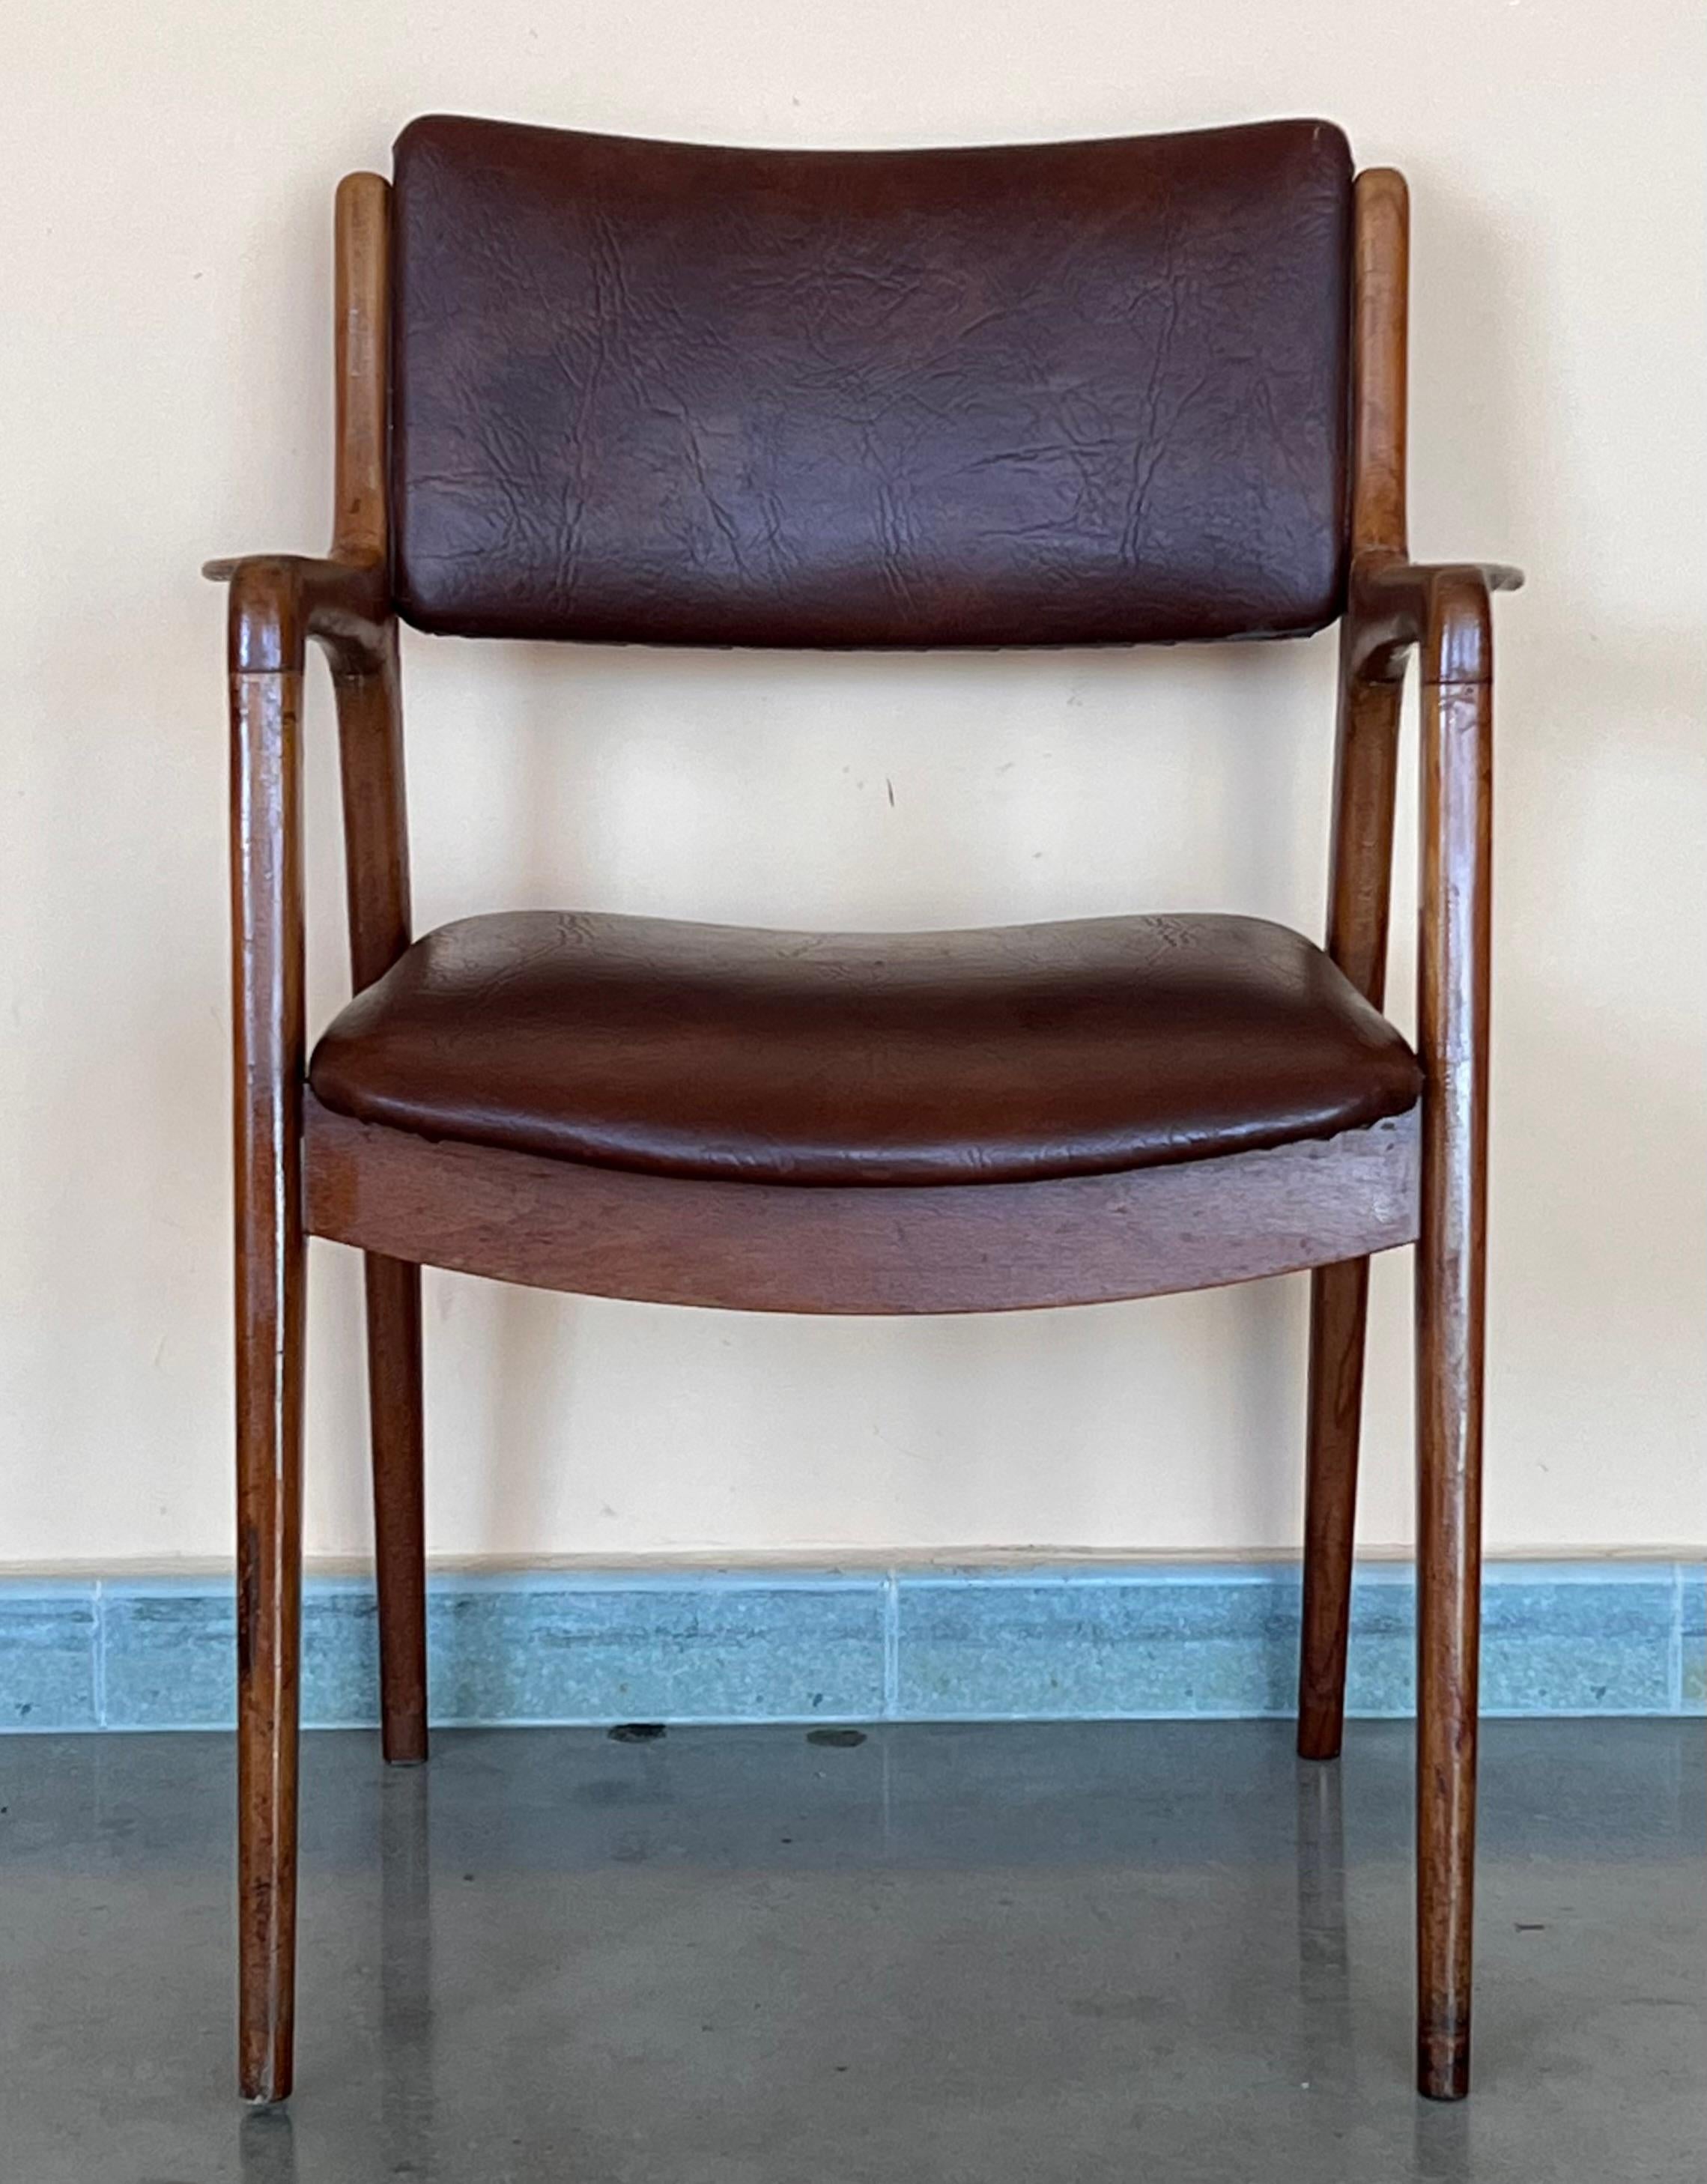 Rare form, teak frame arm chairs with leather seats and backs, in style of Grete Jalk or  Erik Buch .
Armchairs  in very fine original condition, wood restored. 